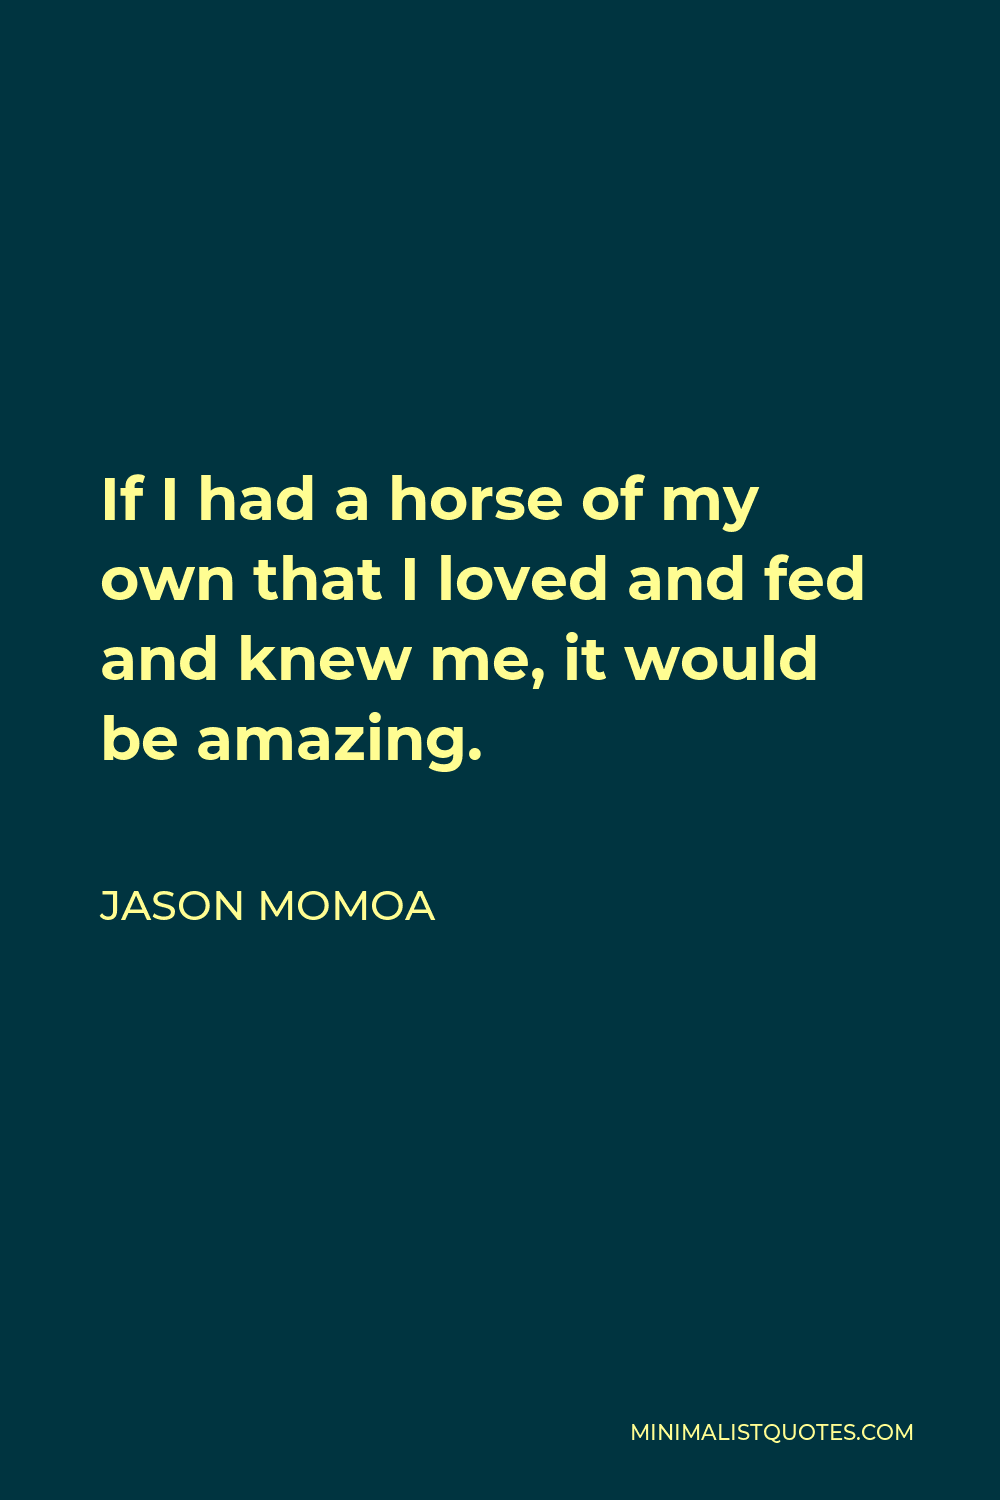 Jason Momoa Quote - If I had a horse of my own that I loved and fed and knew me, it would be amazing.